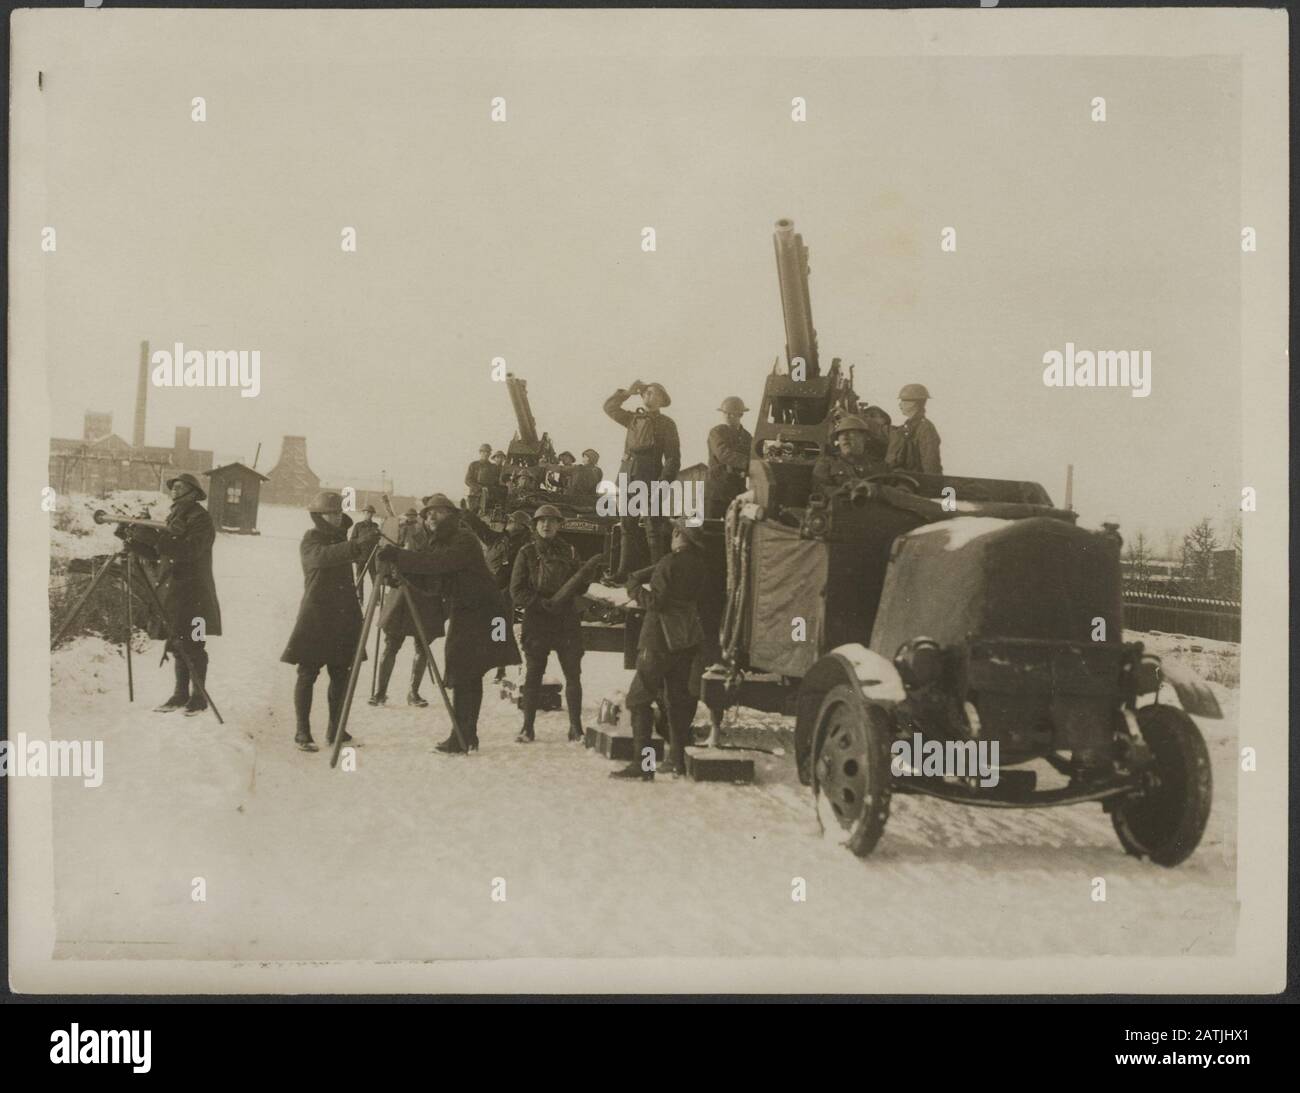 The British Western Front Description: Mobile anti-aircraft gun ready for action Annotation: British Western Front. Mobile flak ready for action Date: {1914-1918} Keywords: WWI, fronts, flak soldiers Stock Photo